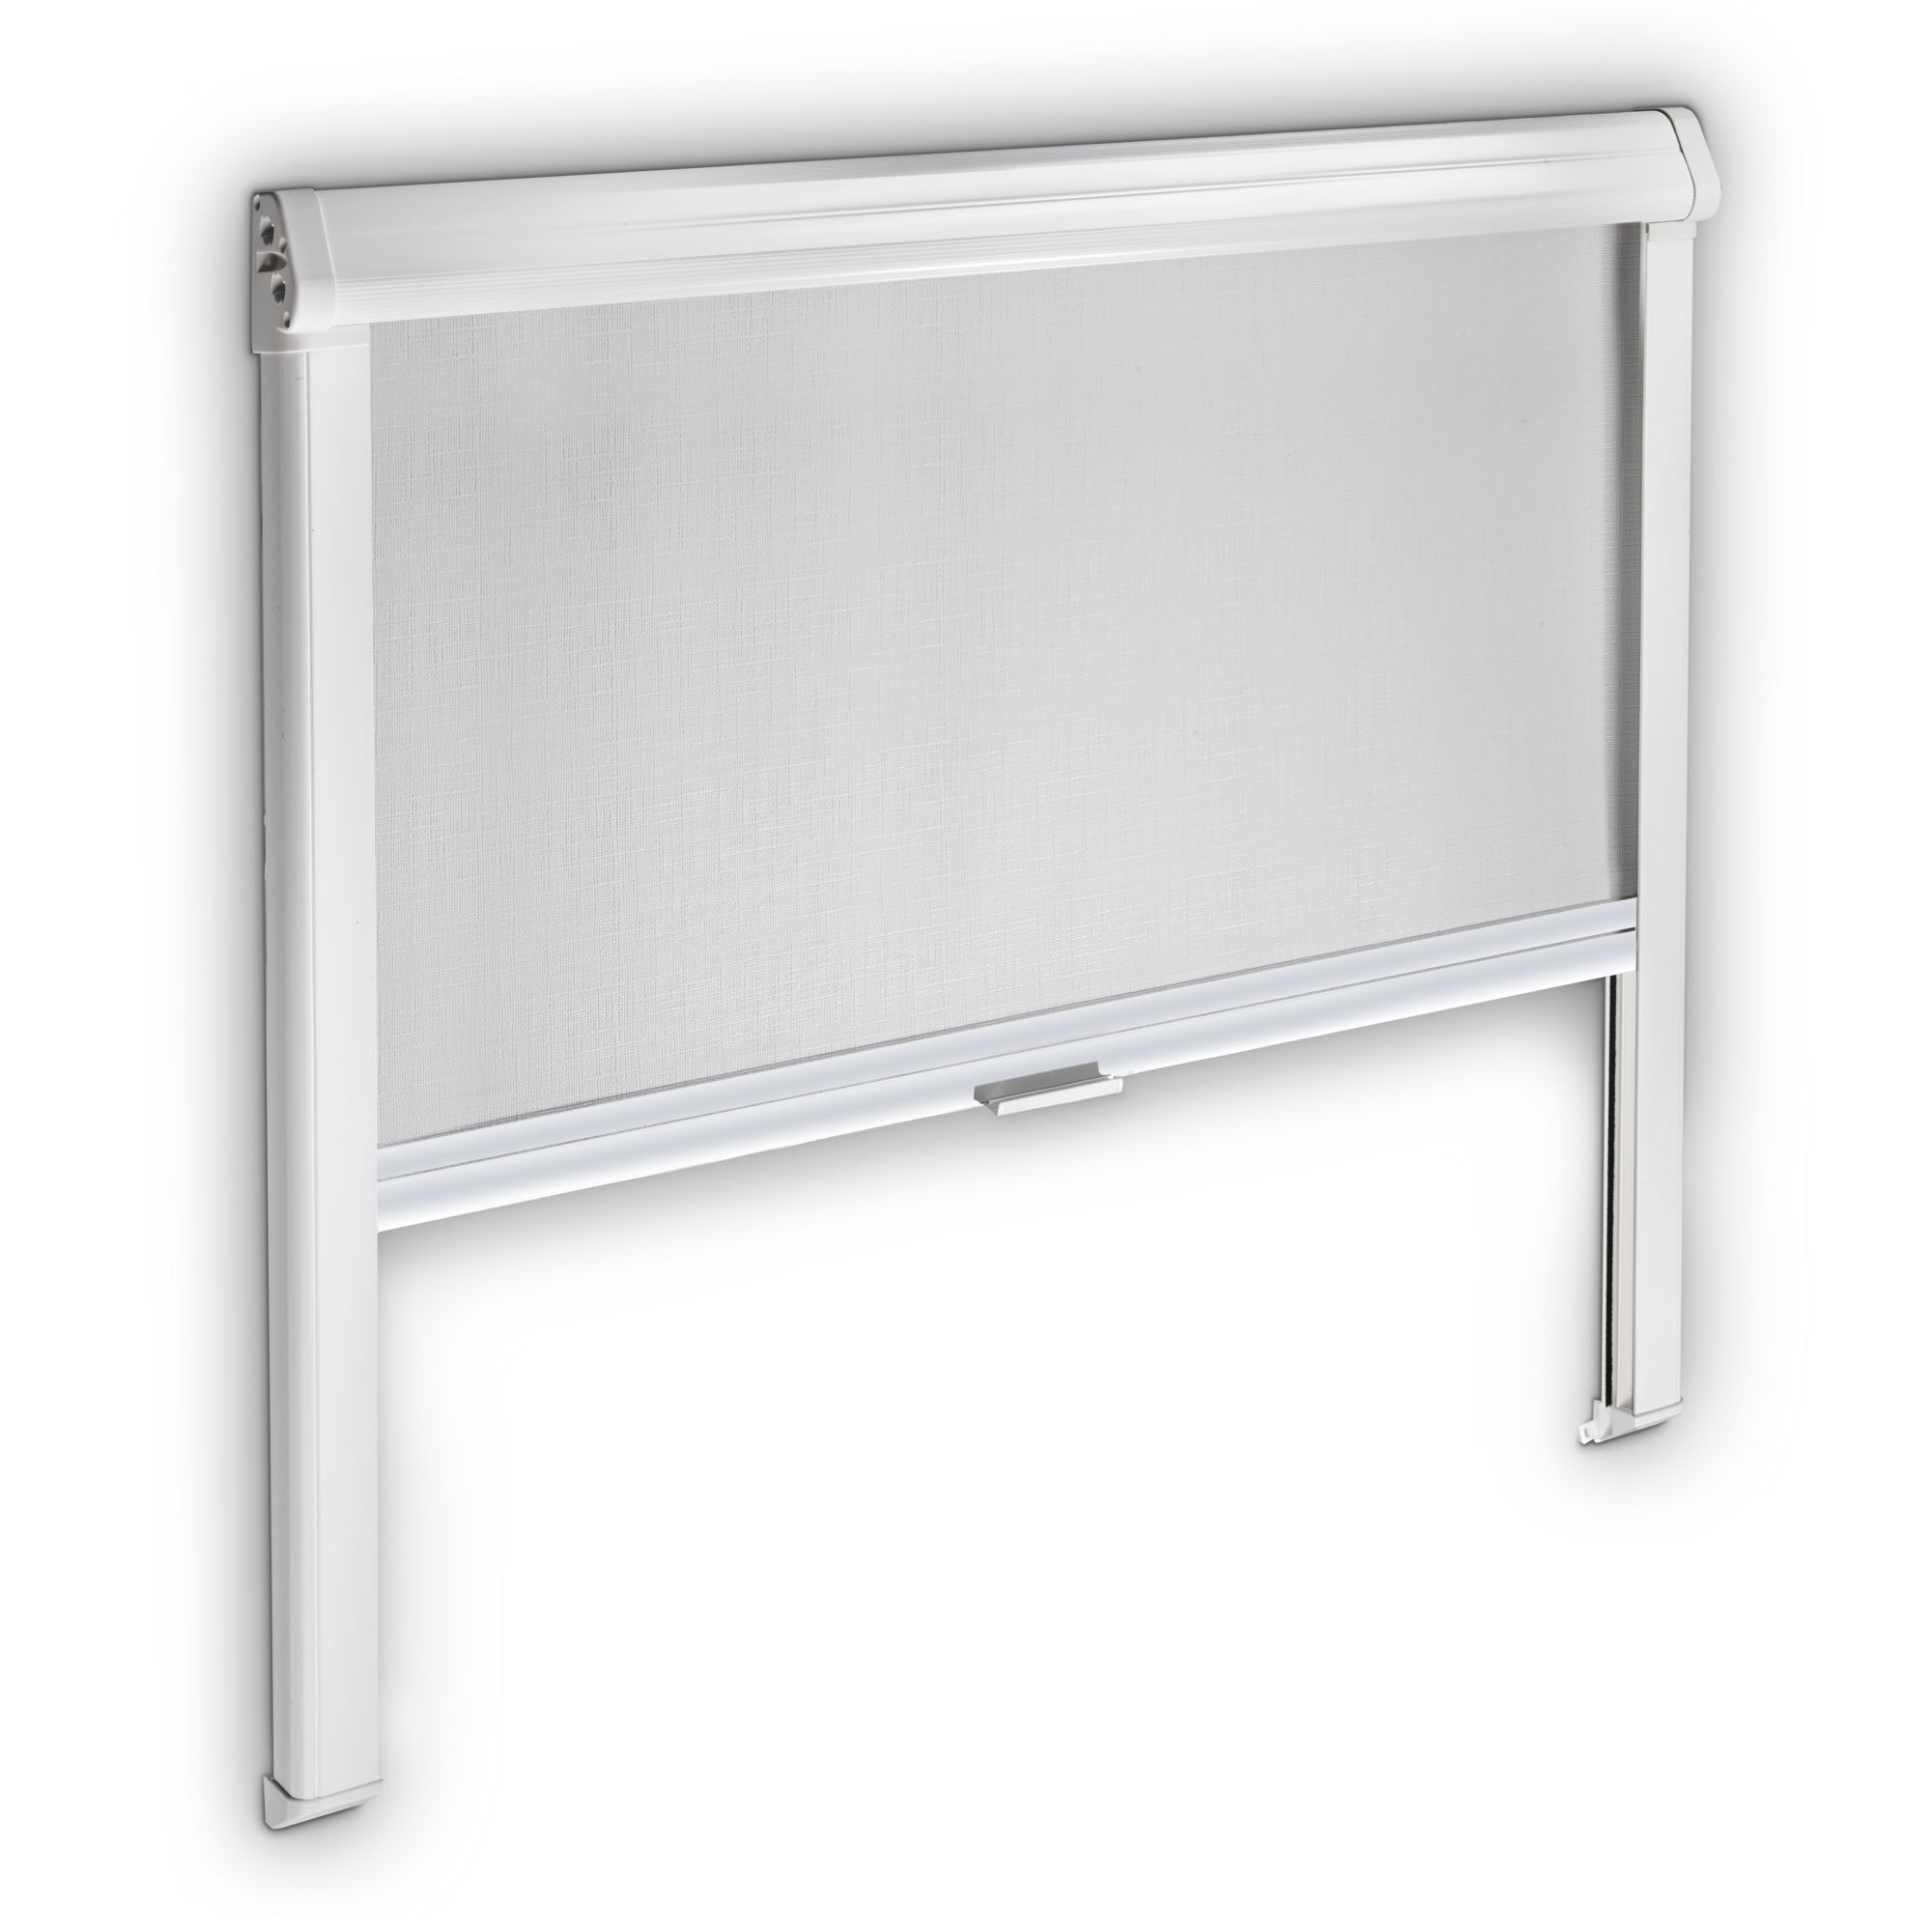 Dometic Black-Out Roller Blind 3000, 1160 x 710 mm, traffic-white